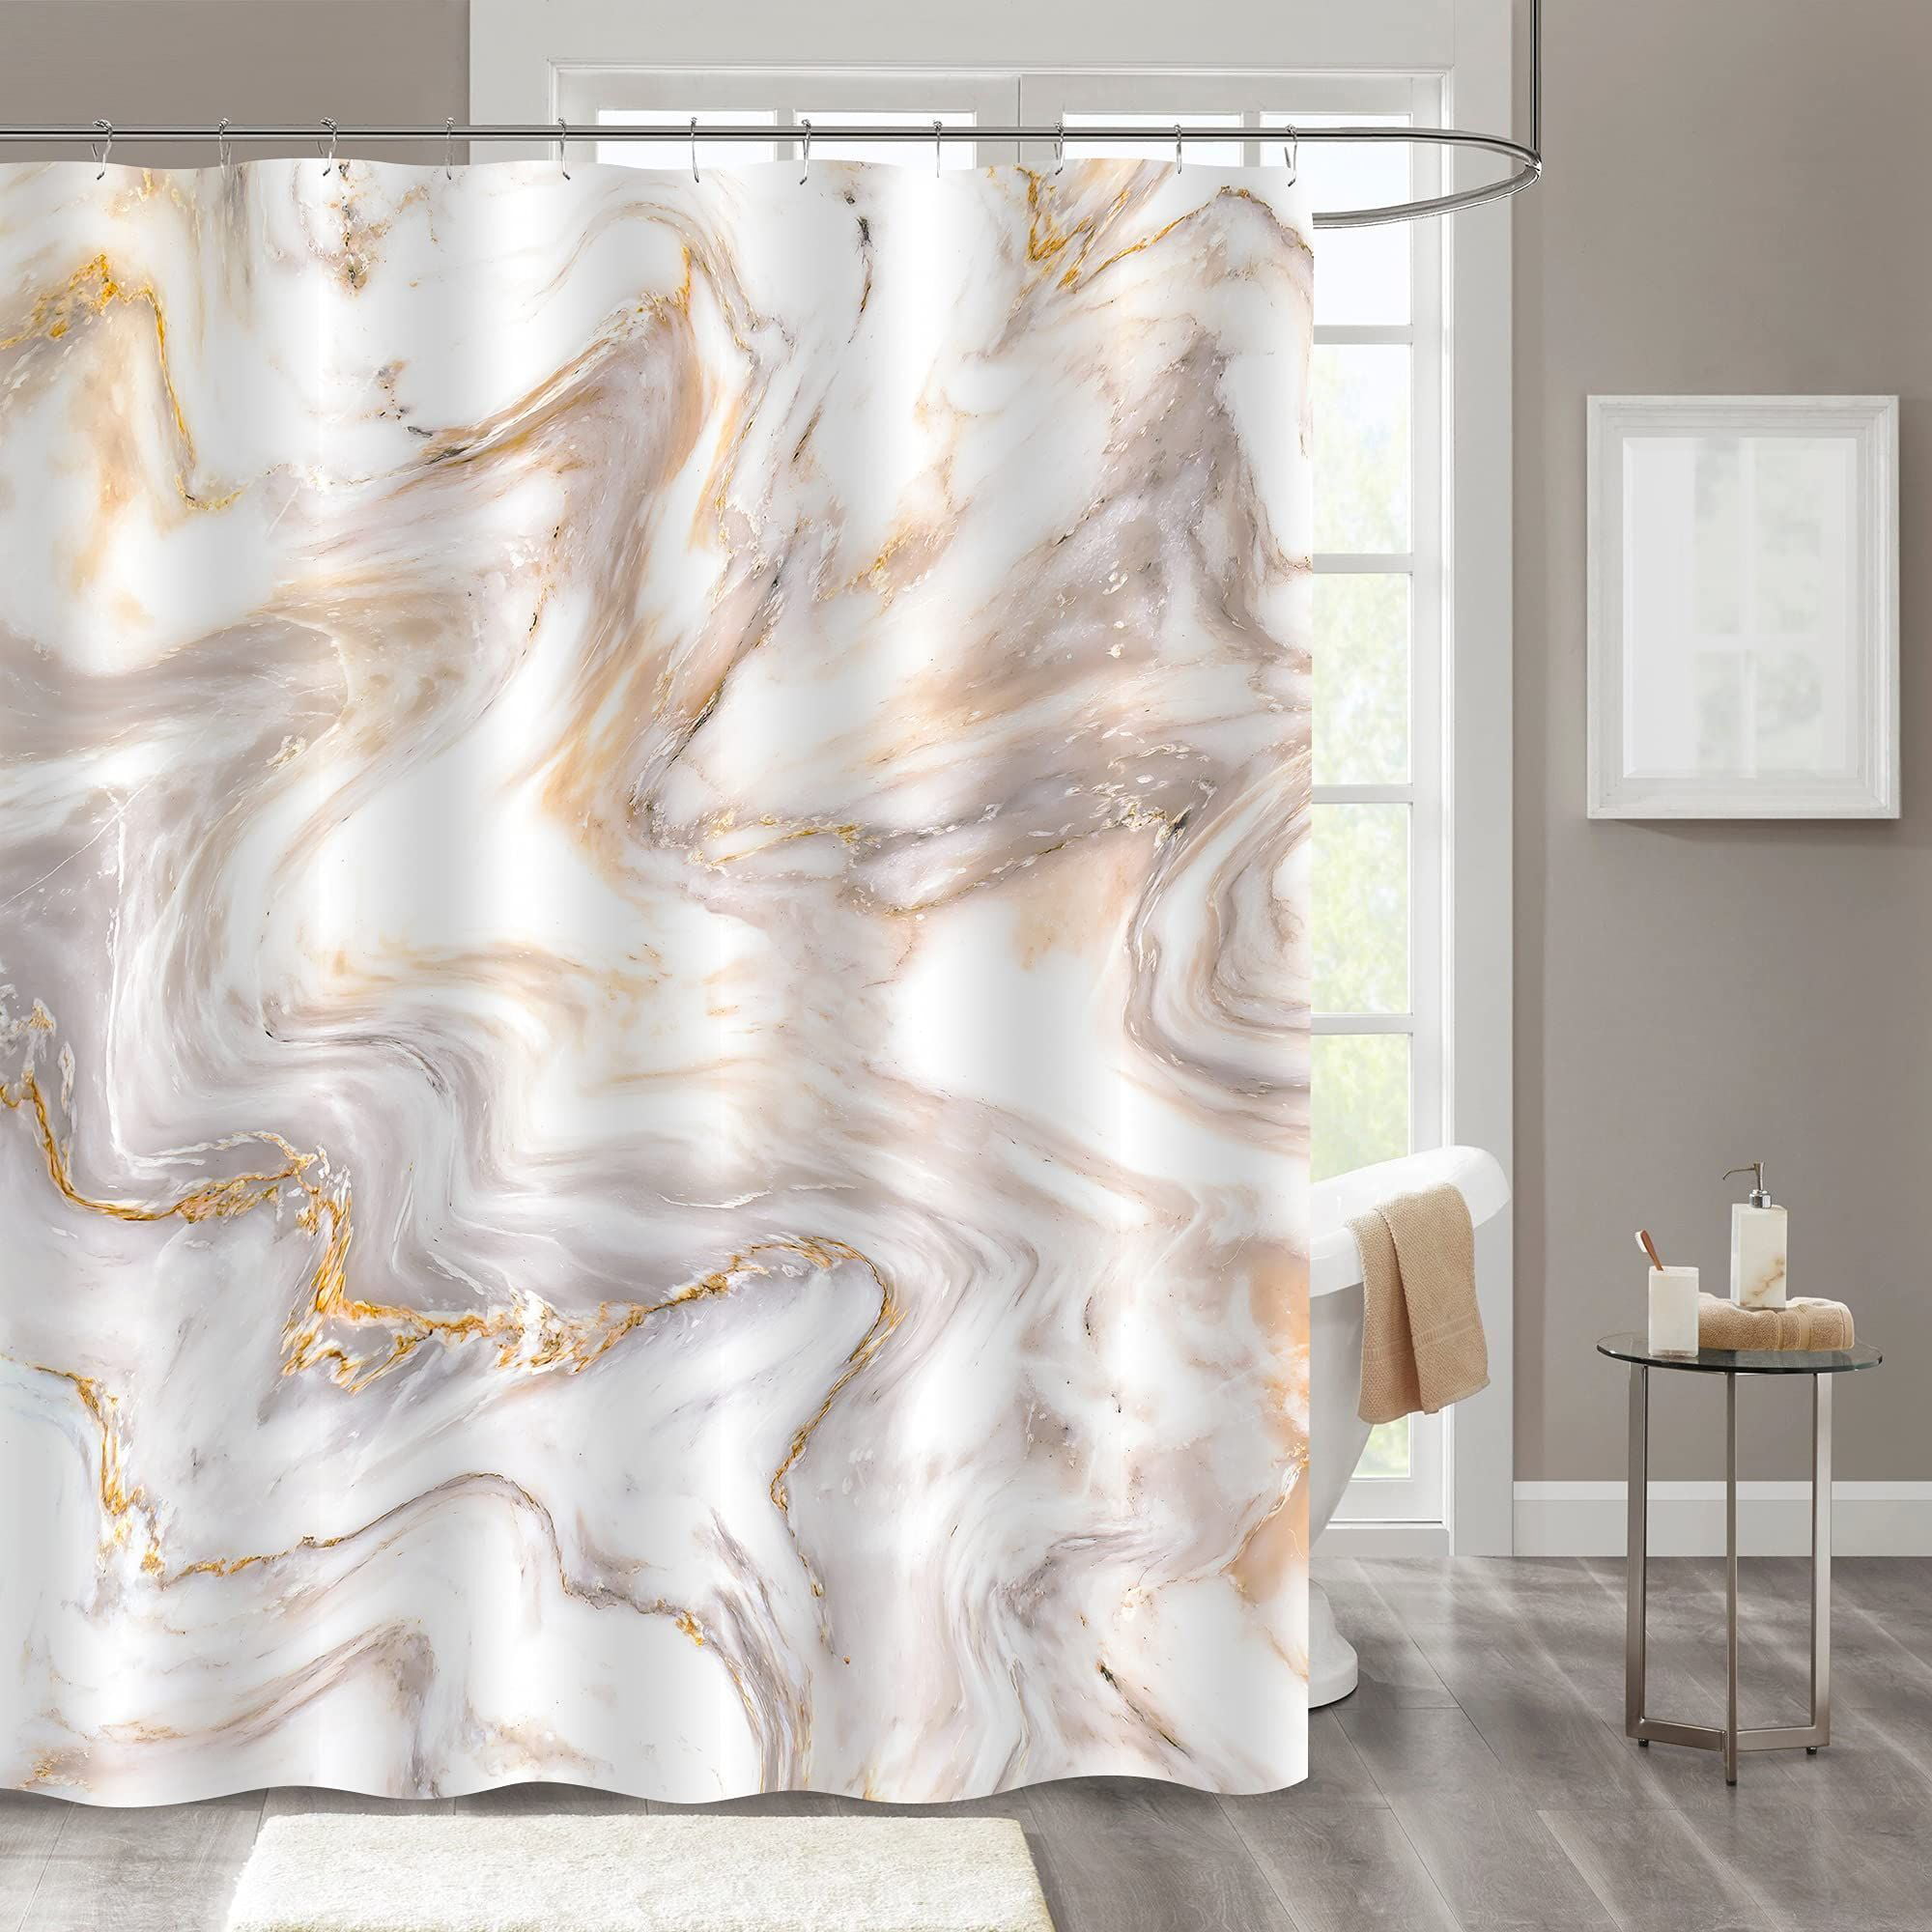 White and Grey Marble Shower Curtain Liner Bathroom Mat Polyester Fabric Hooks 